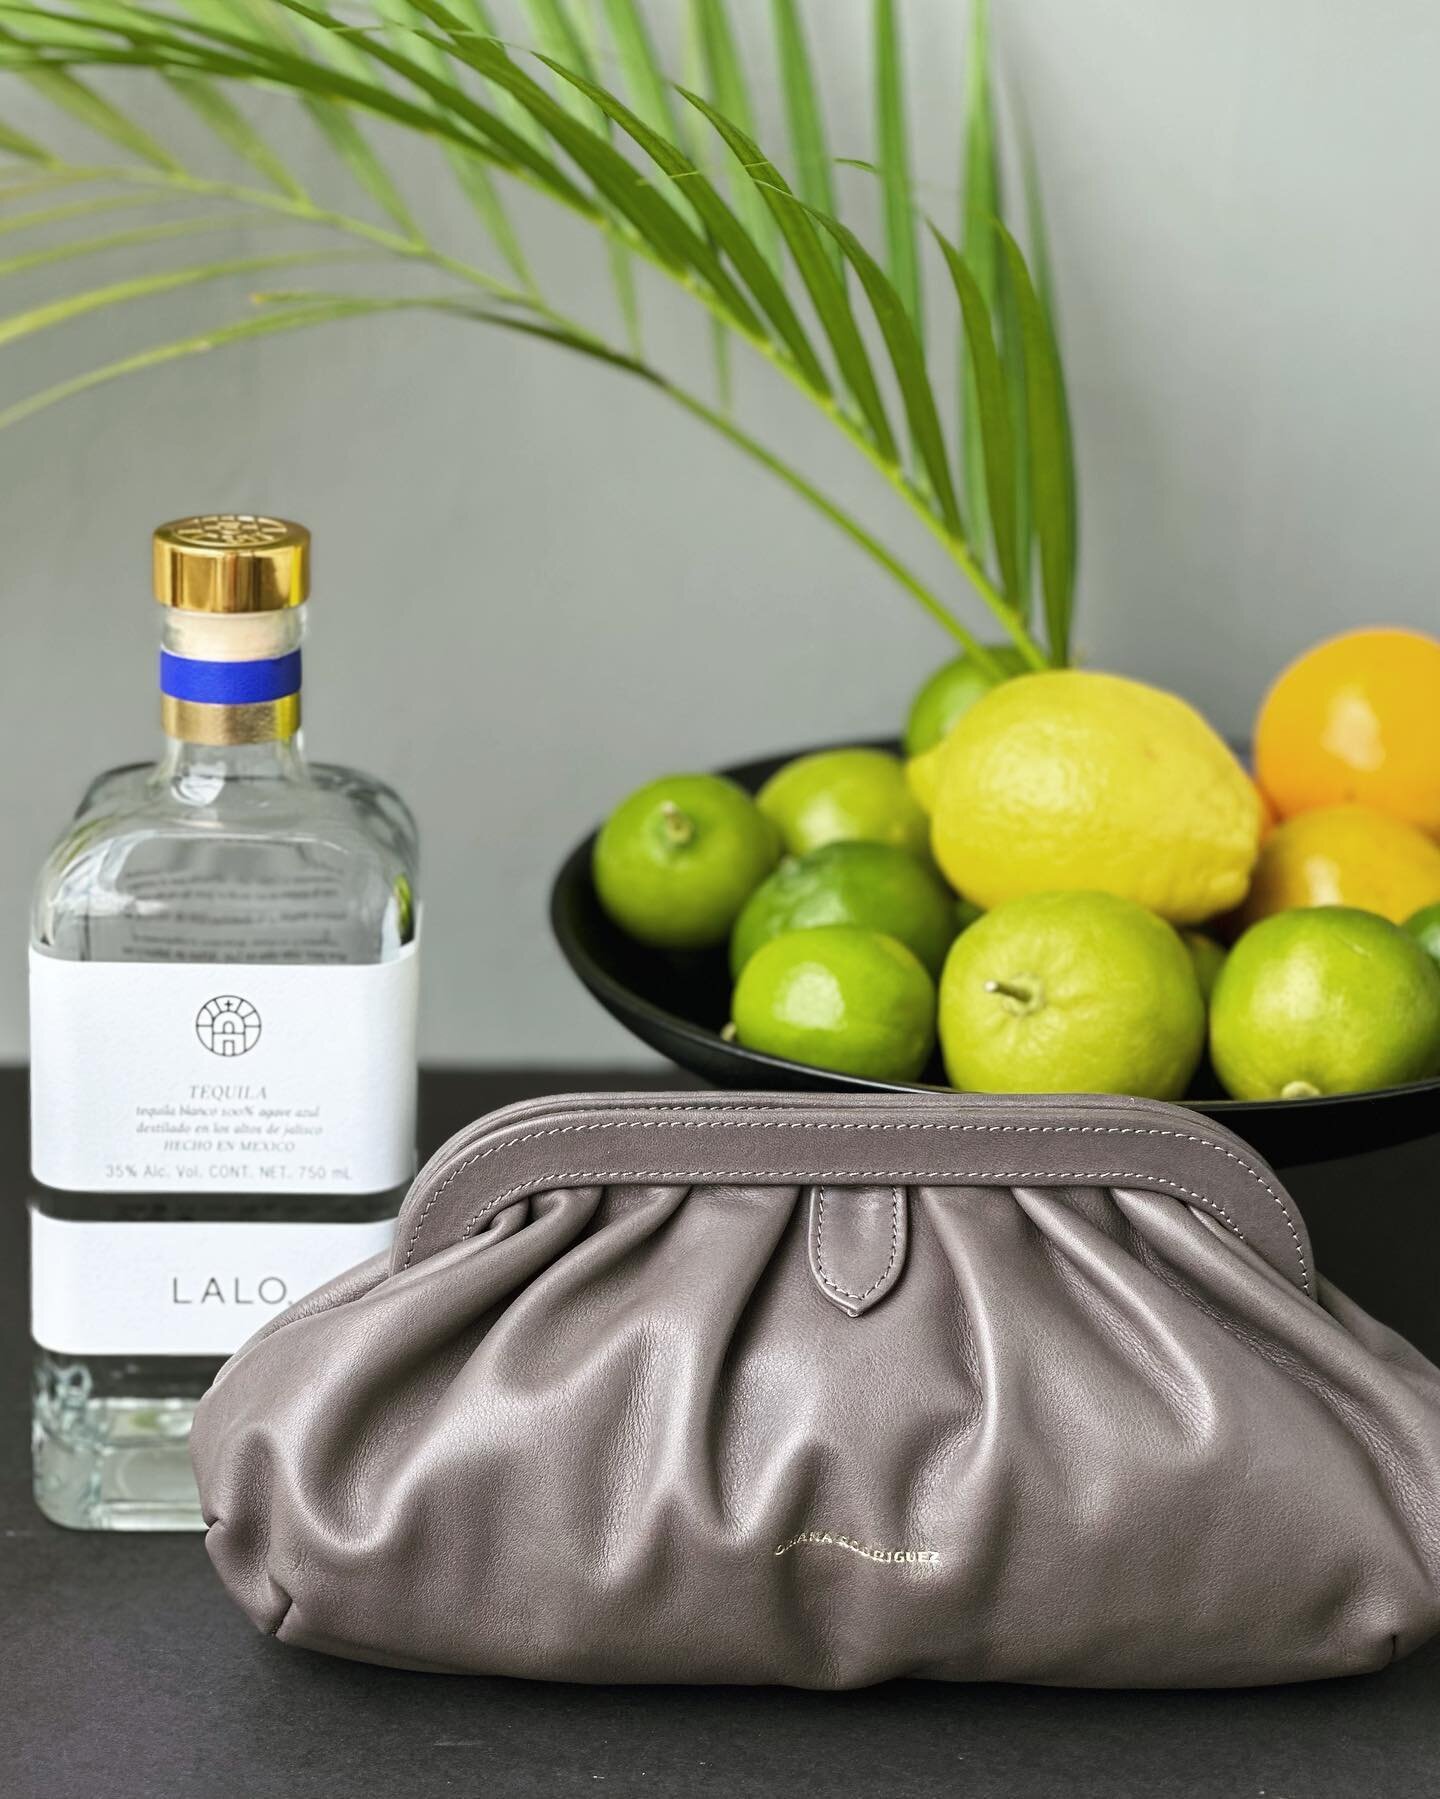 Tonight! 🥂👜 Celebrate Cinco de Mayo and the launch of Oriana Rodriguez Handbags newest collection at Shopboy, in partnership with LALO Tequila. Margaritas will be flowing and all bag purchase come with a bottle of tequila. Shopboy, 4pm-7pm